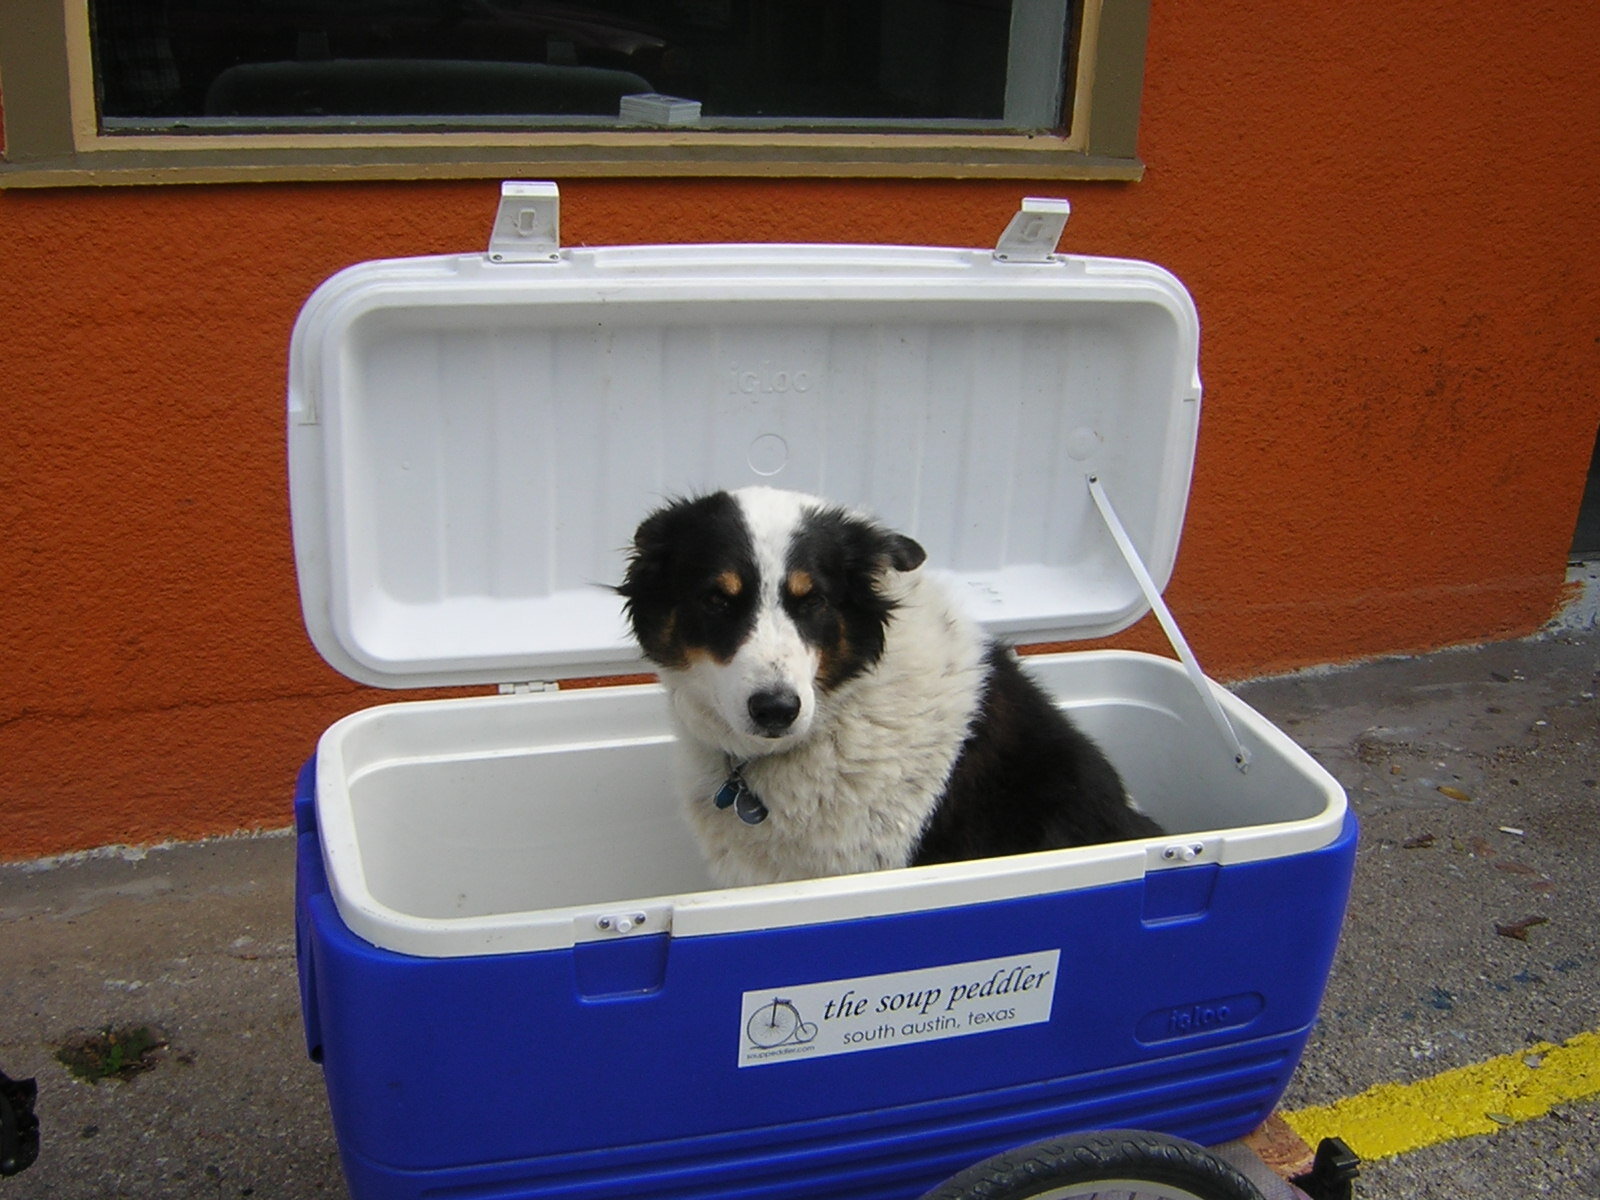 Border collie in the cooler!